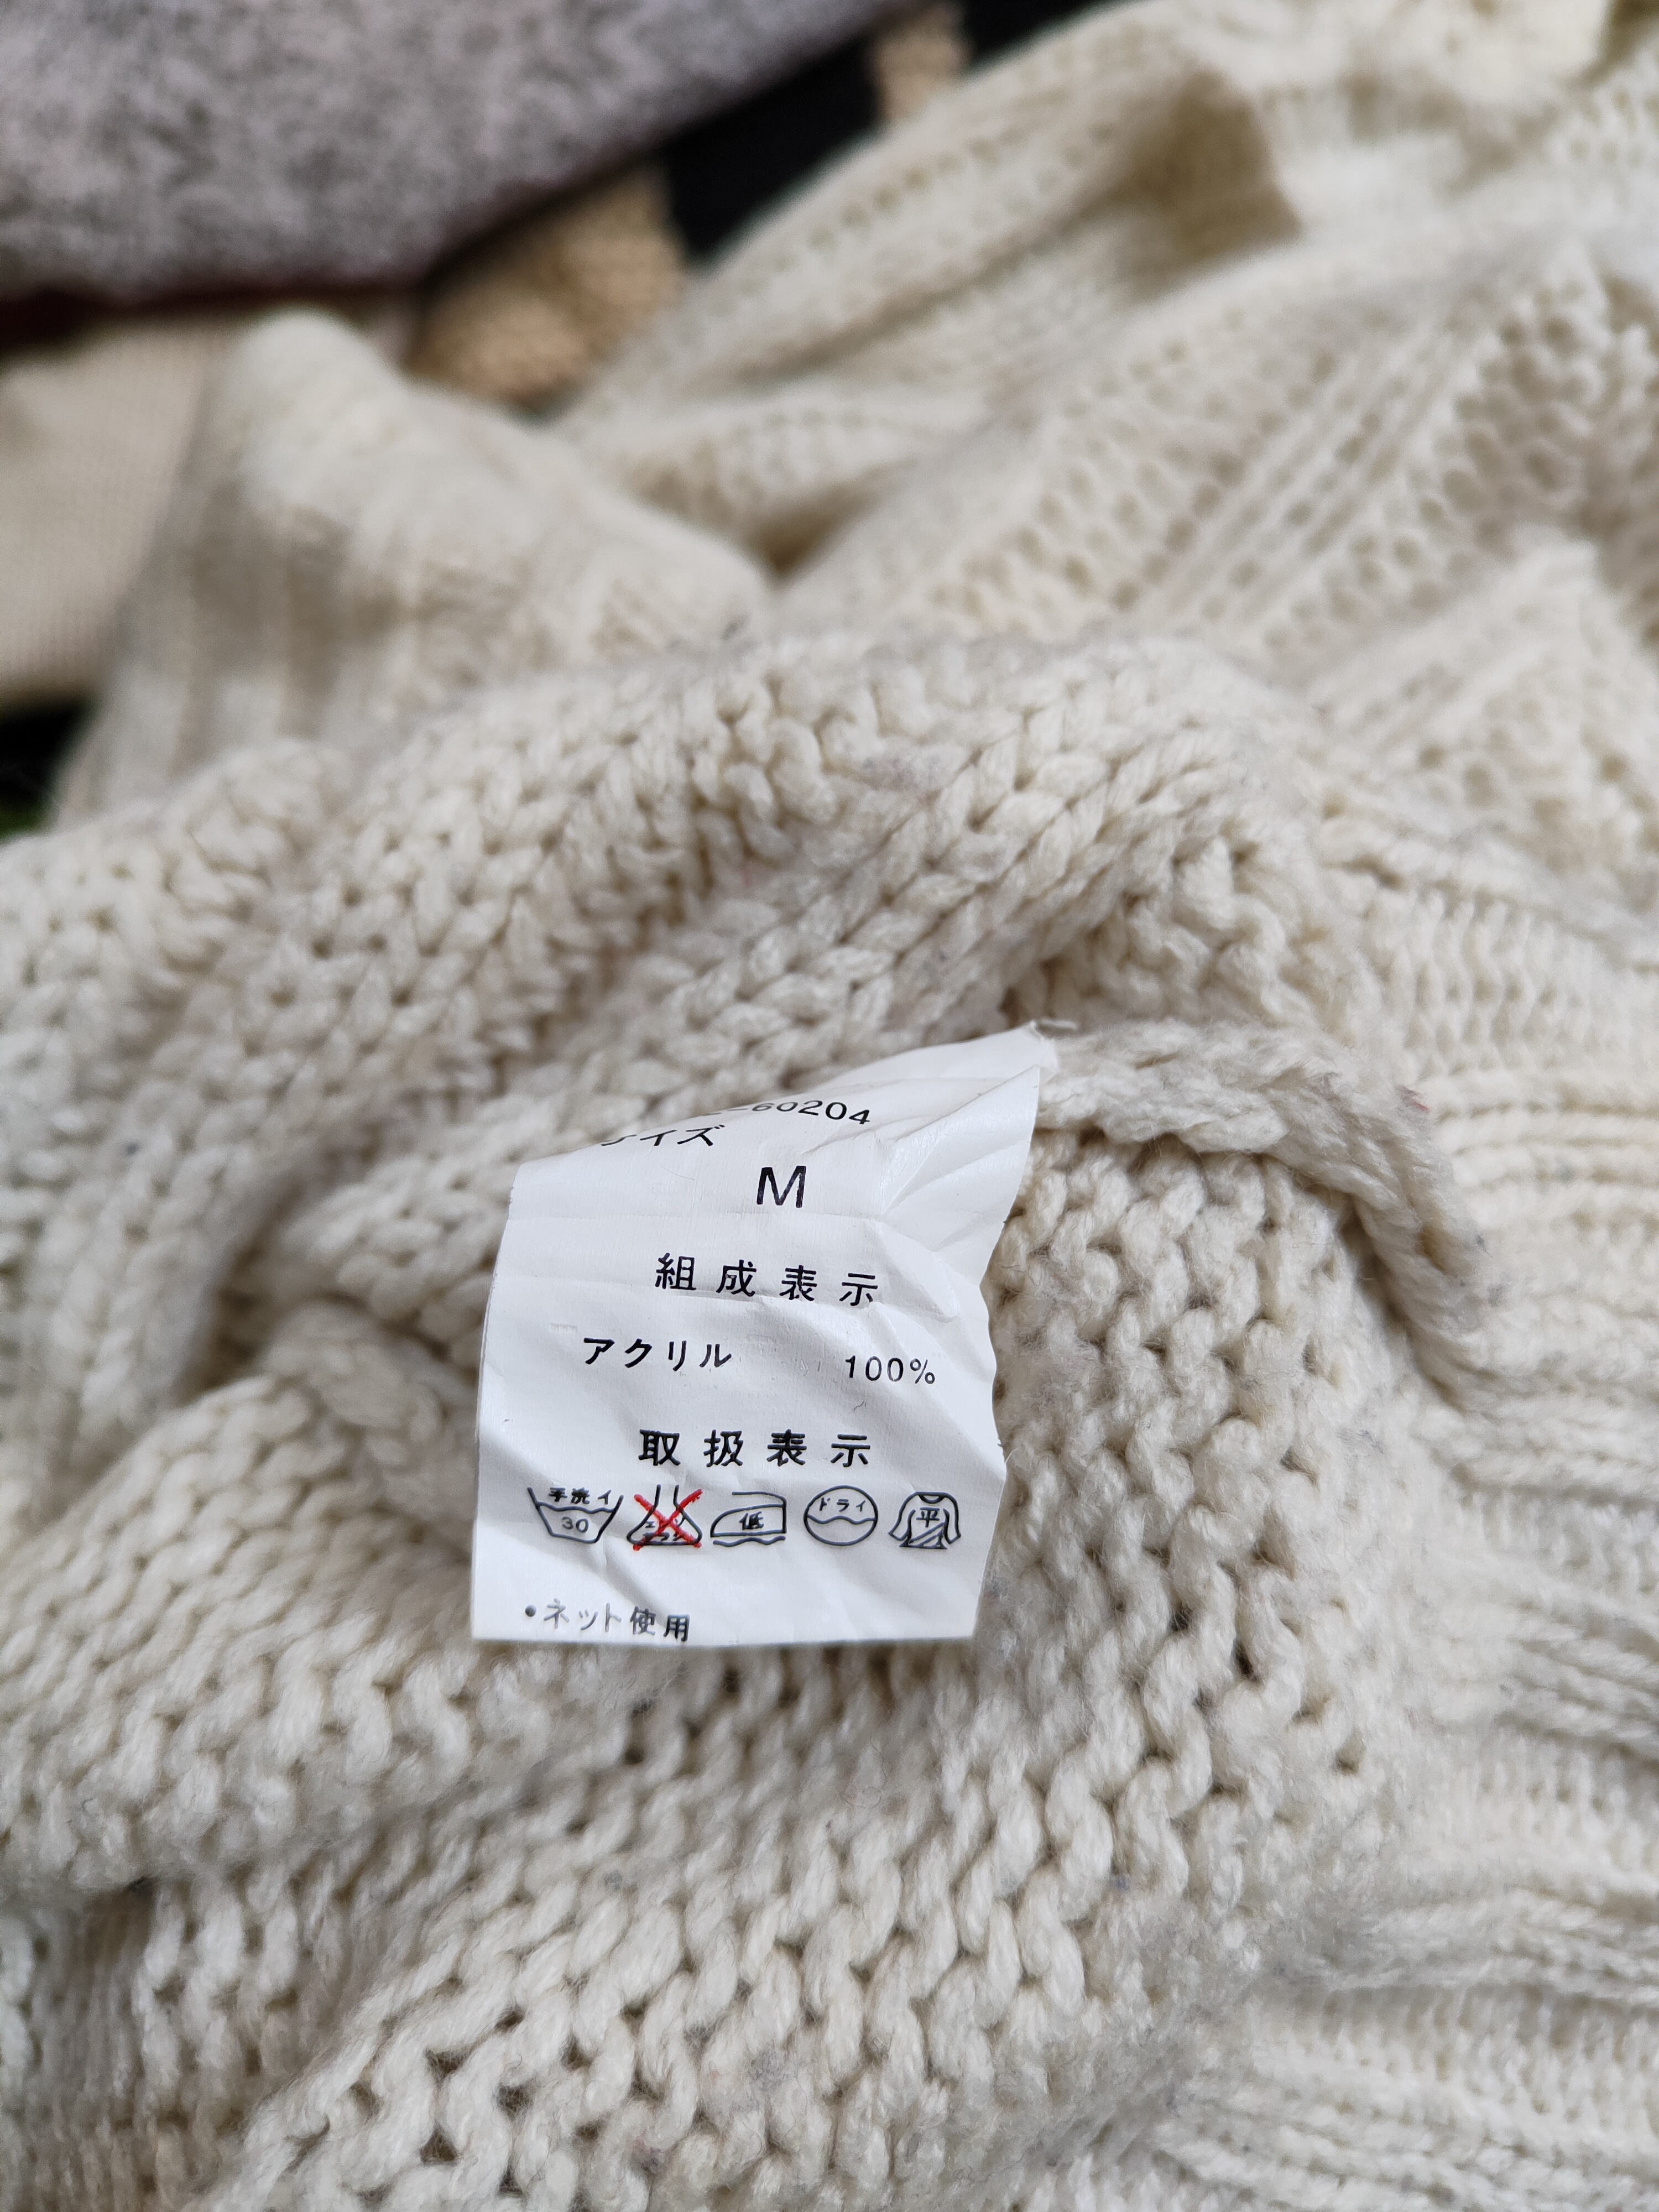 Japanese Brand - Archives White Knitwear Sweater Damage With Stain - 10